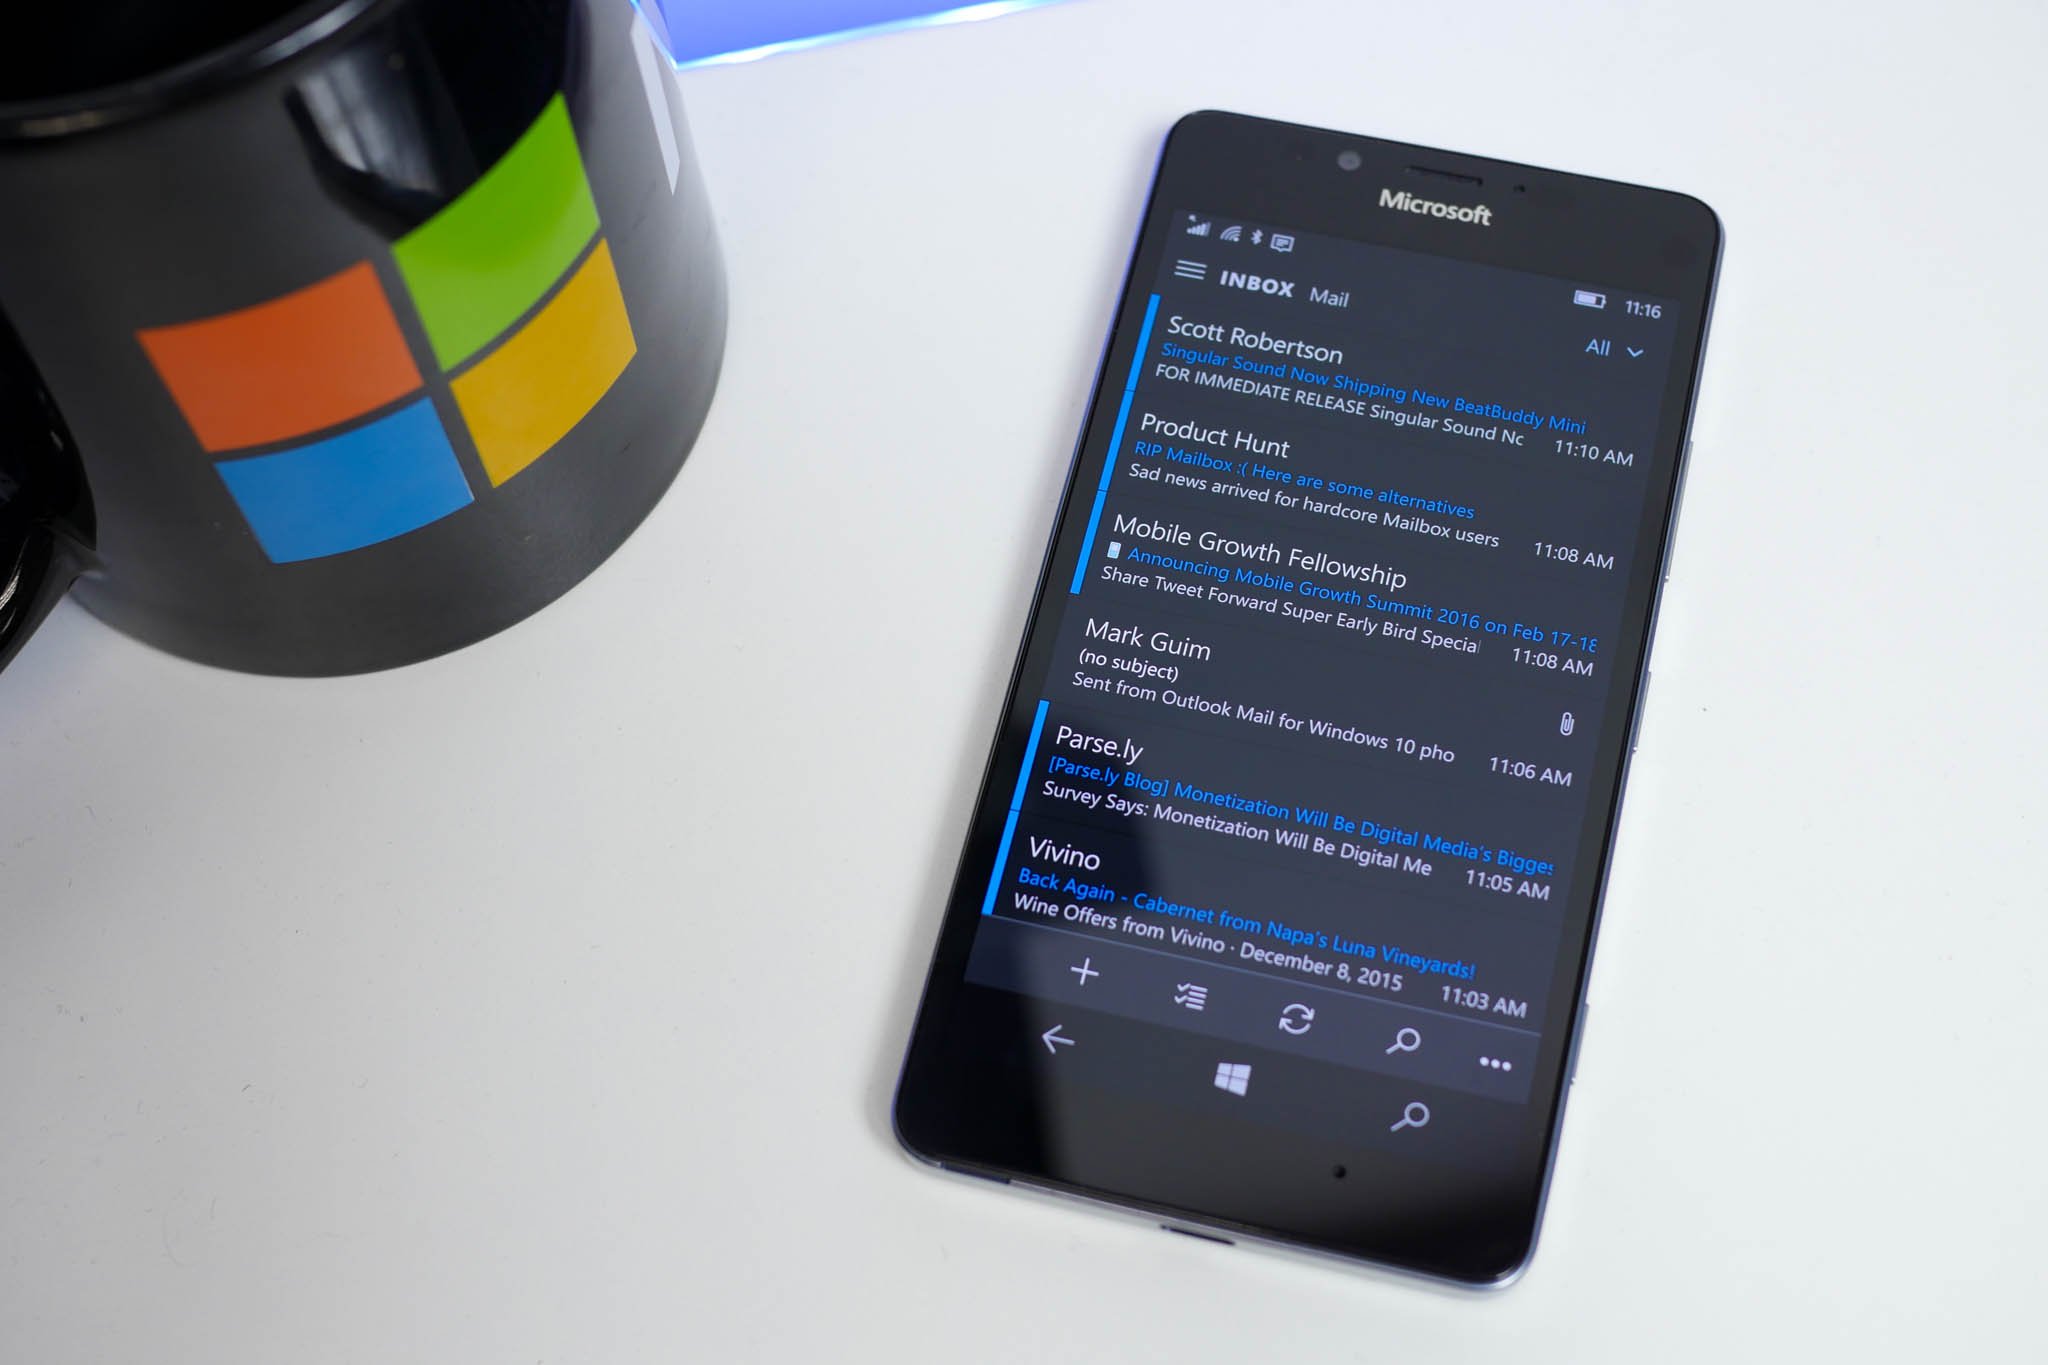 lumia-950-outlook-mail-unified-inbox.jpg